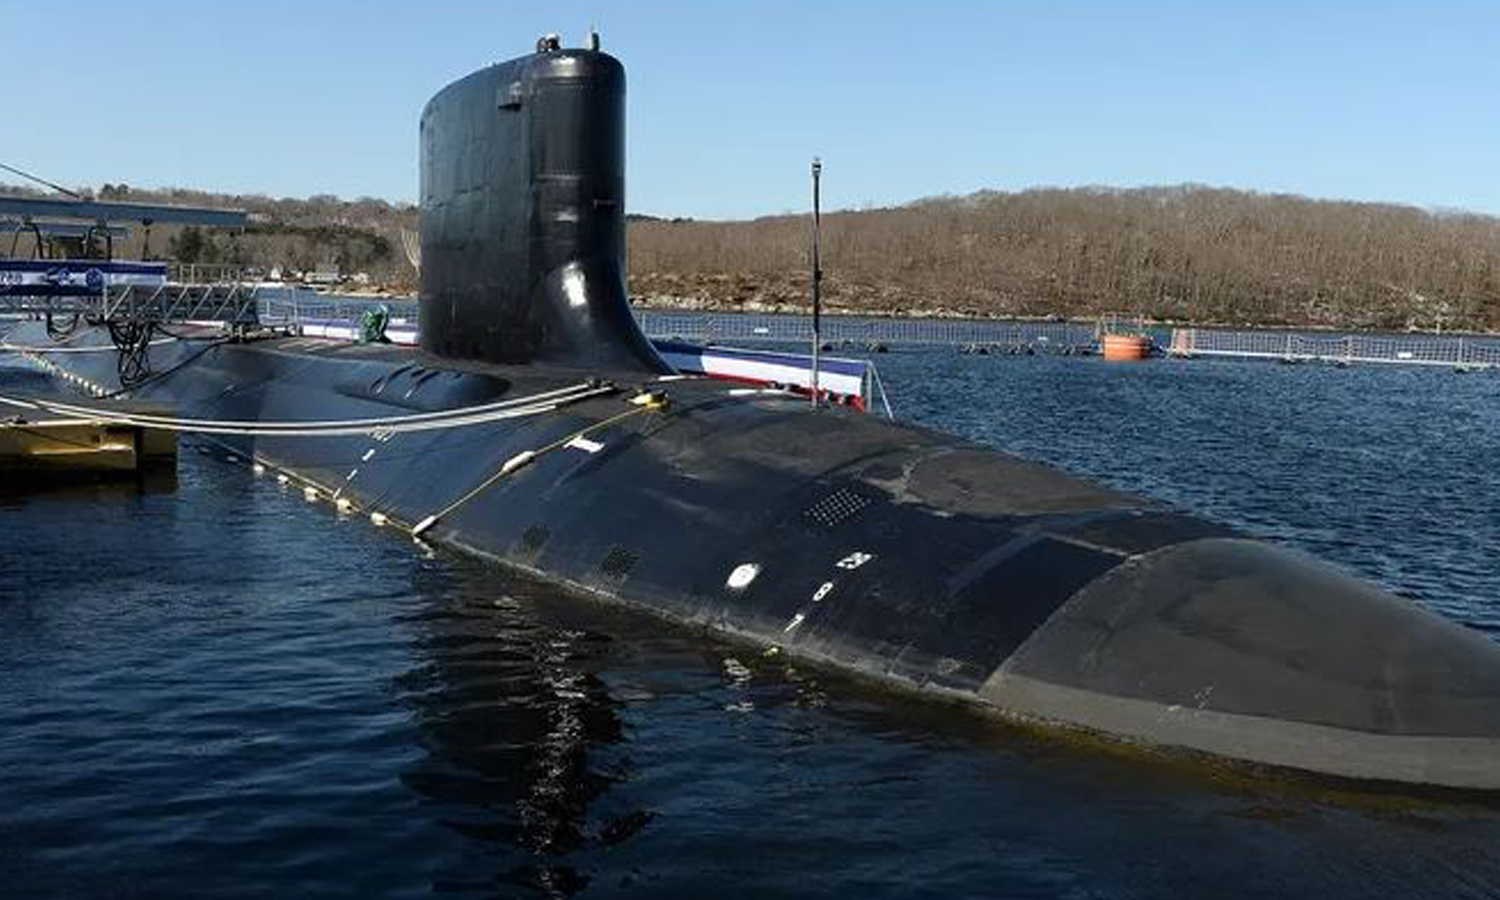 Australia is modernizing its military fleet with US nuclear submarines